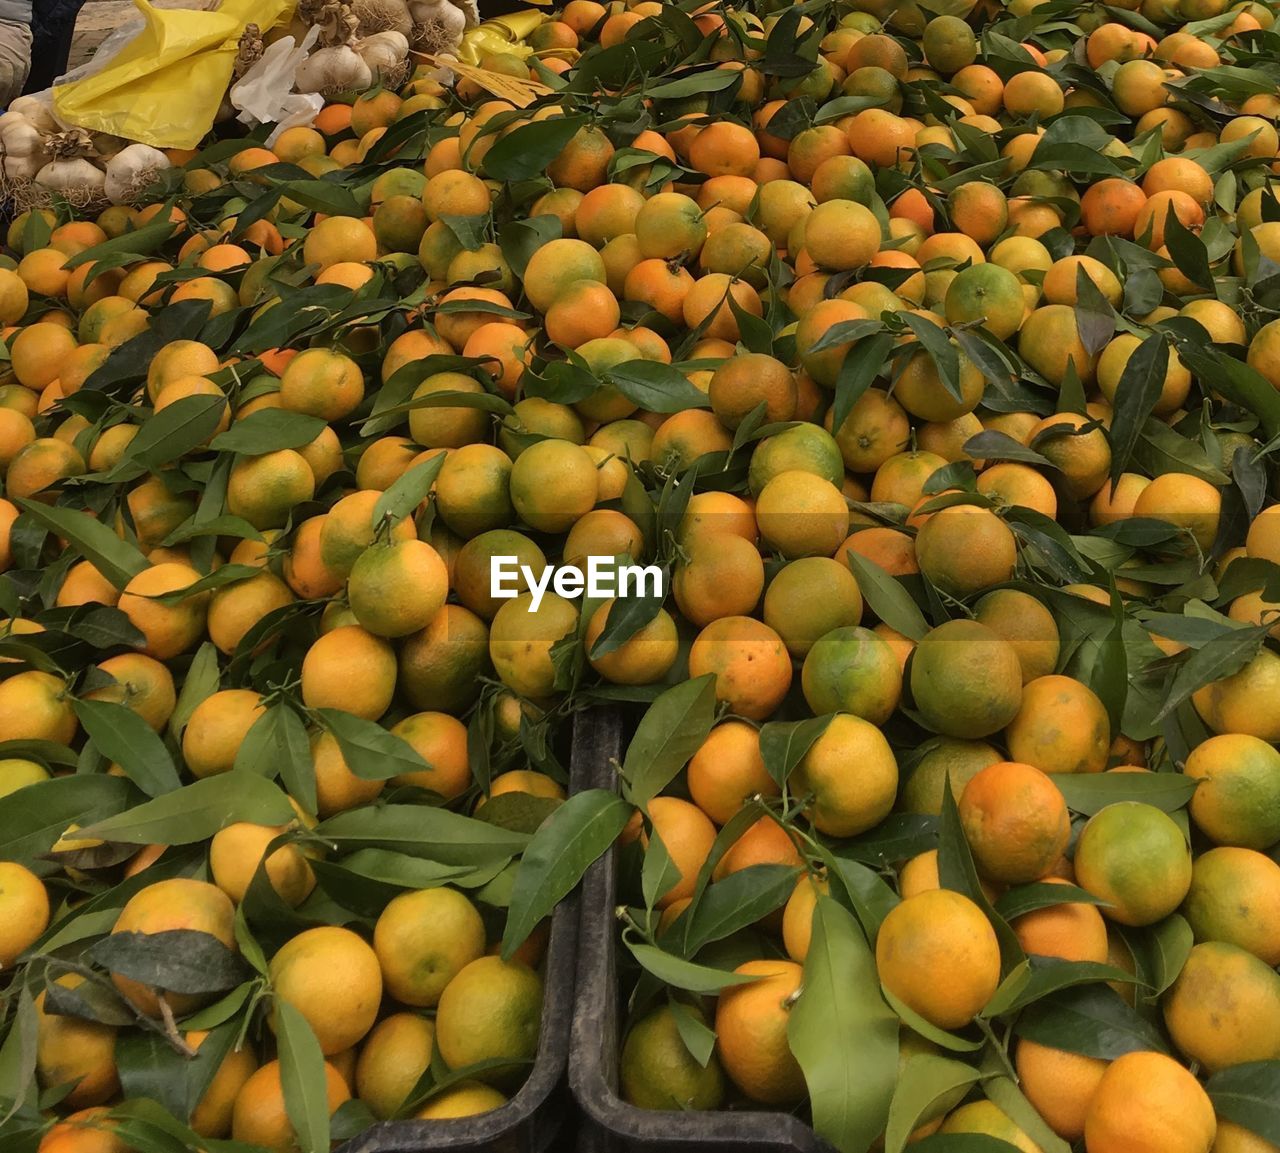 Oranges with leaves straight from farm for sale in market